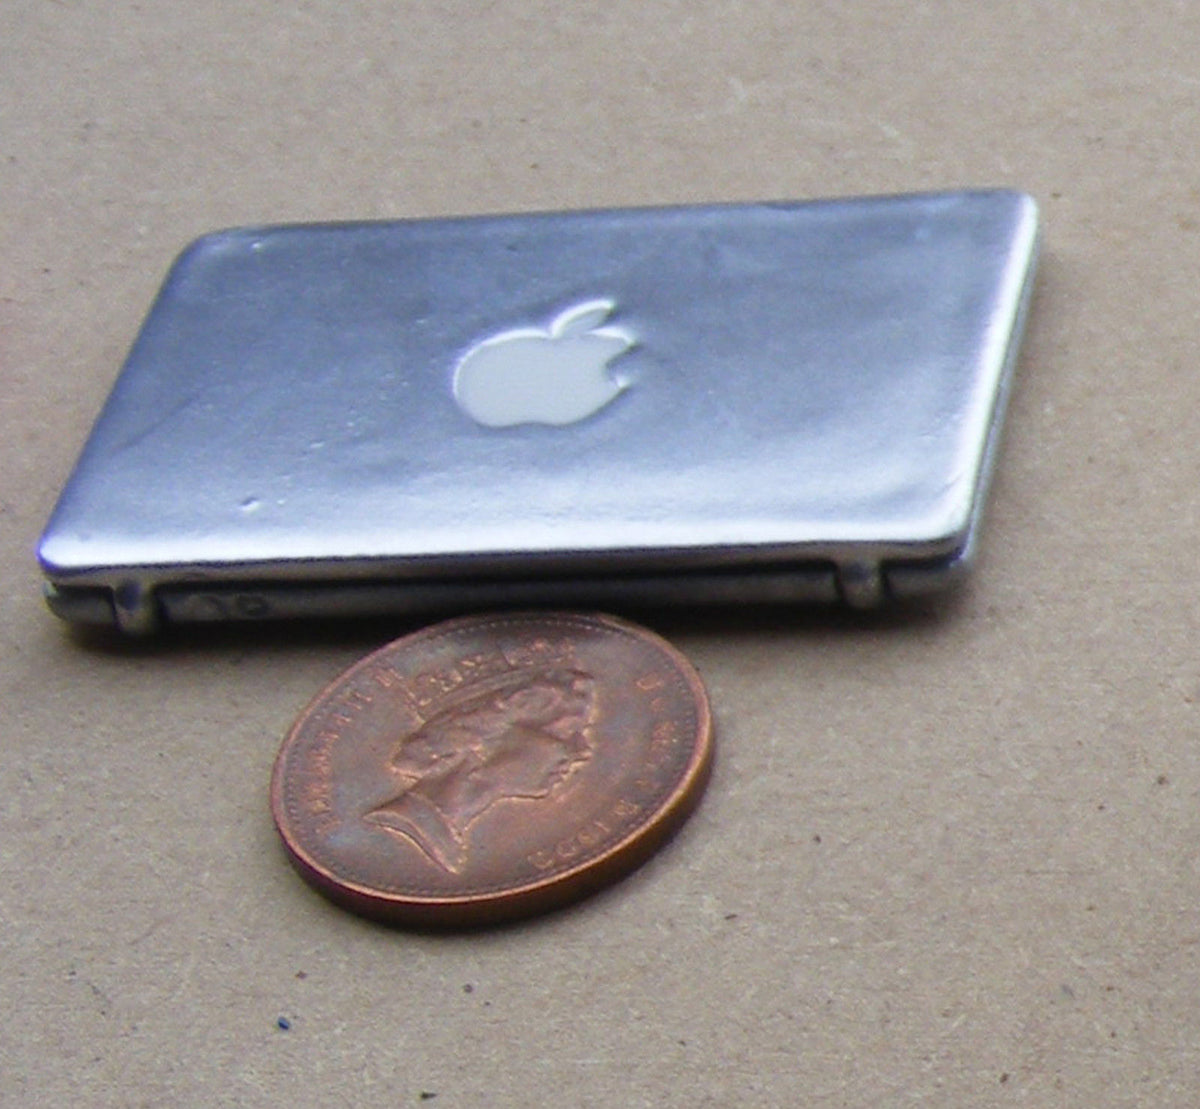 Notebook (McBook Pro) TOY miniature Scale 1:12 for Dollhouse miniature